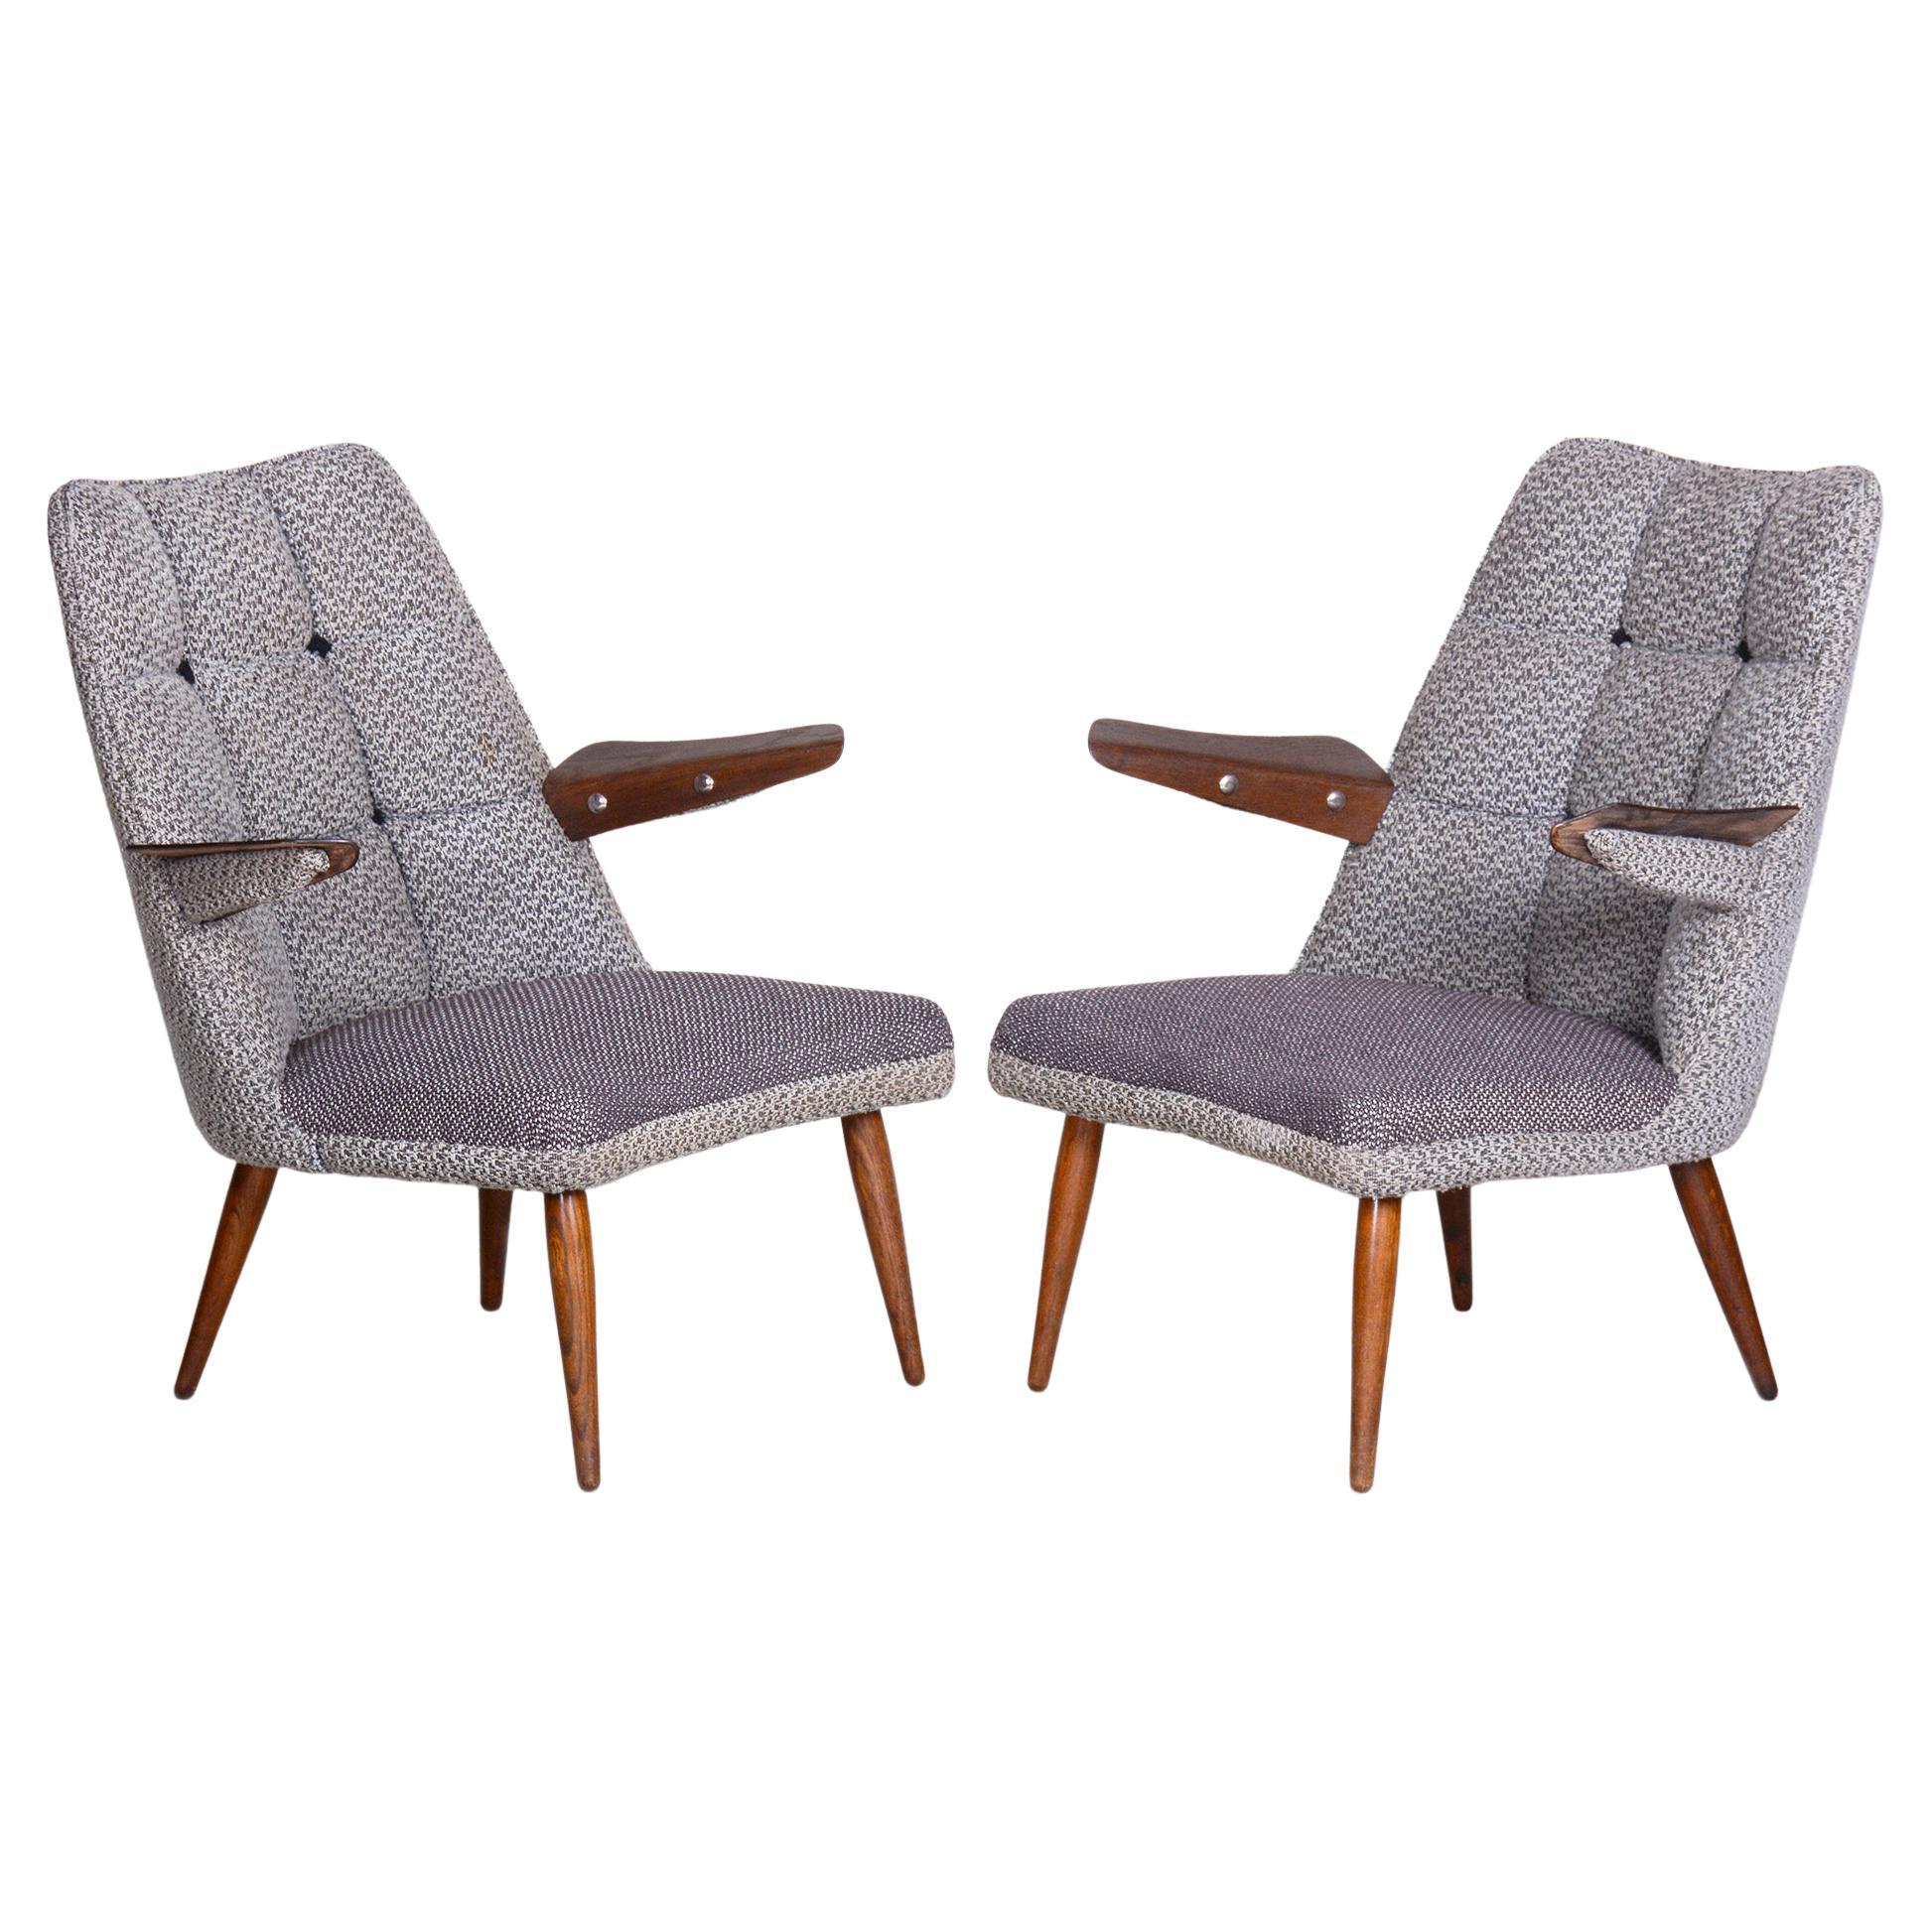 Set of Two Grey Mid Century Armchairs Made in 1950s Czechia, Original Condition For Sale